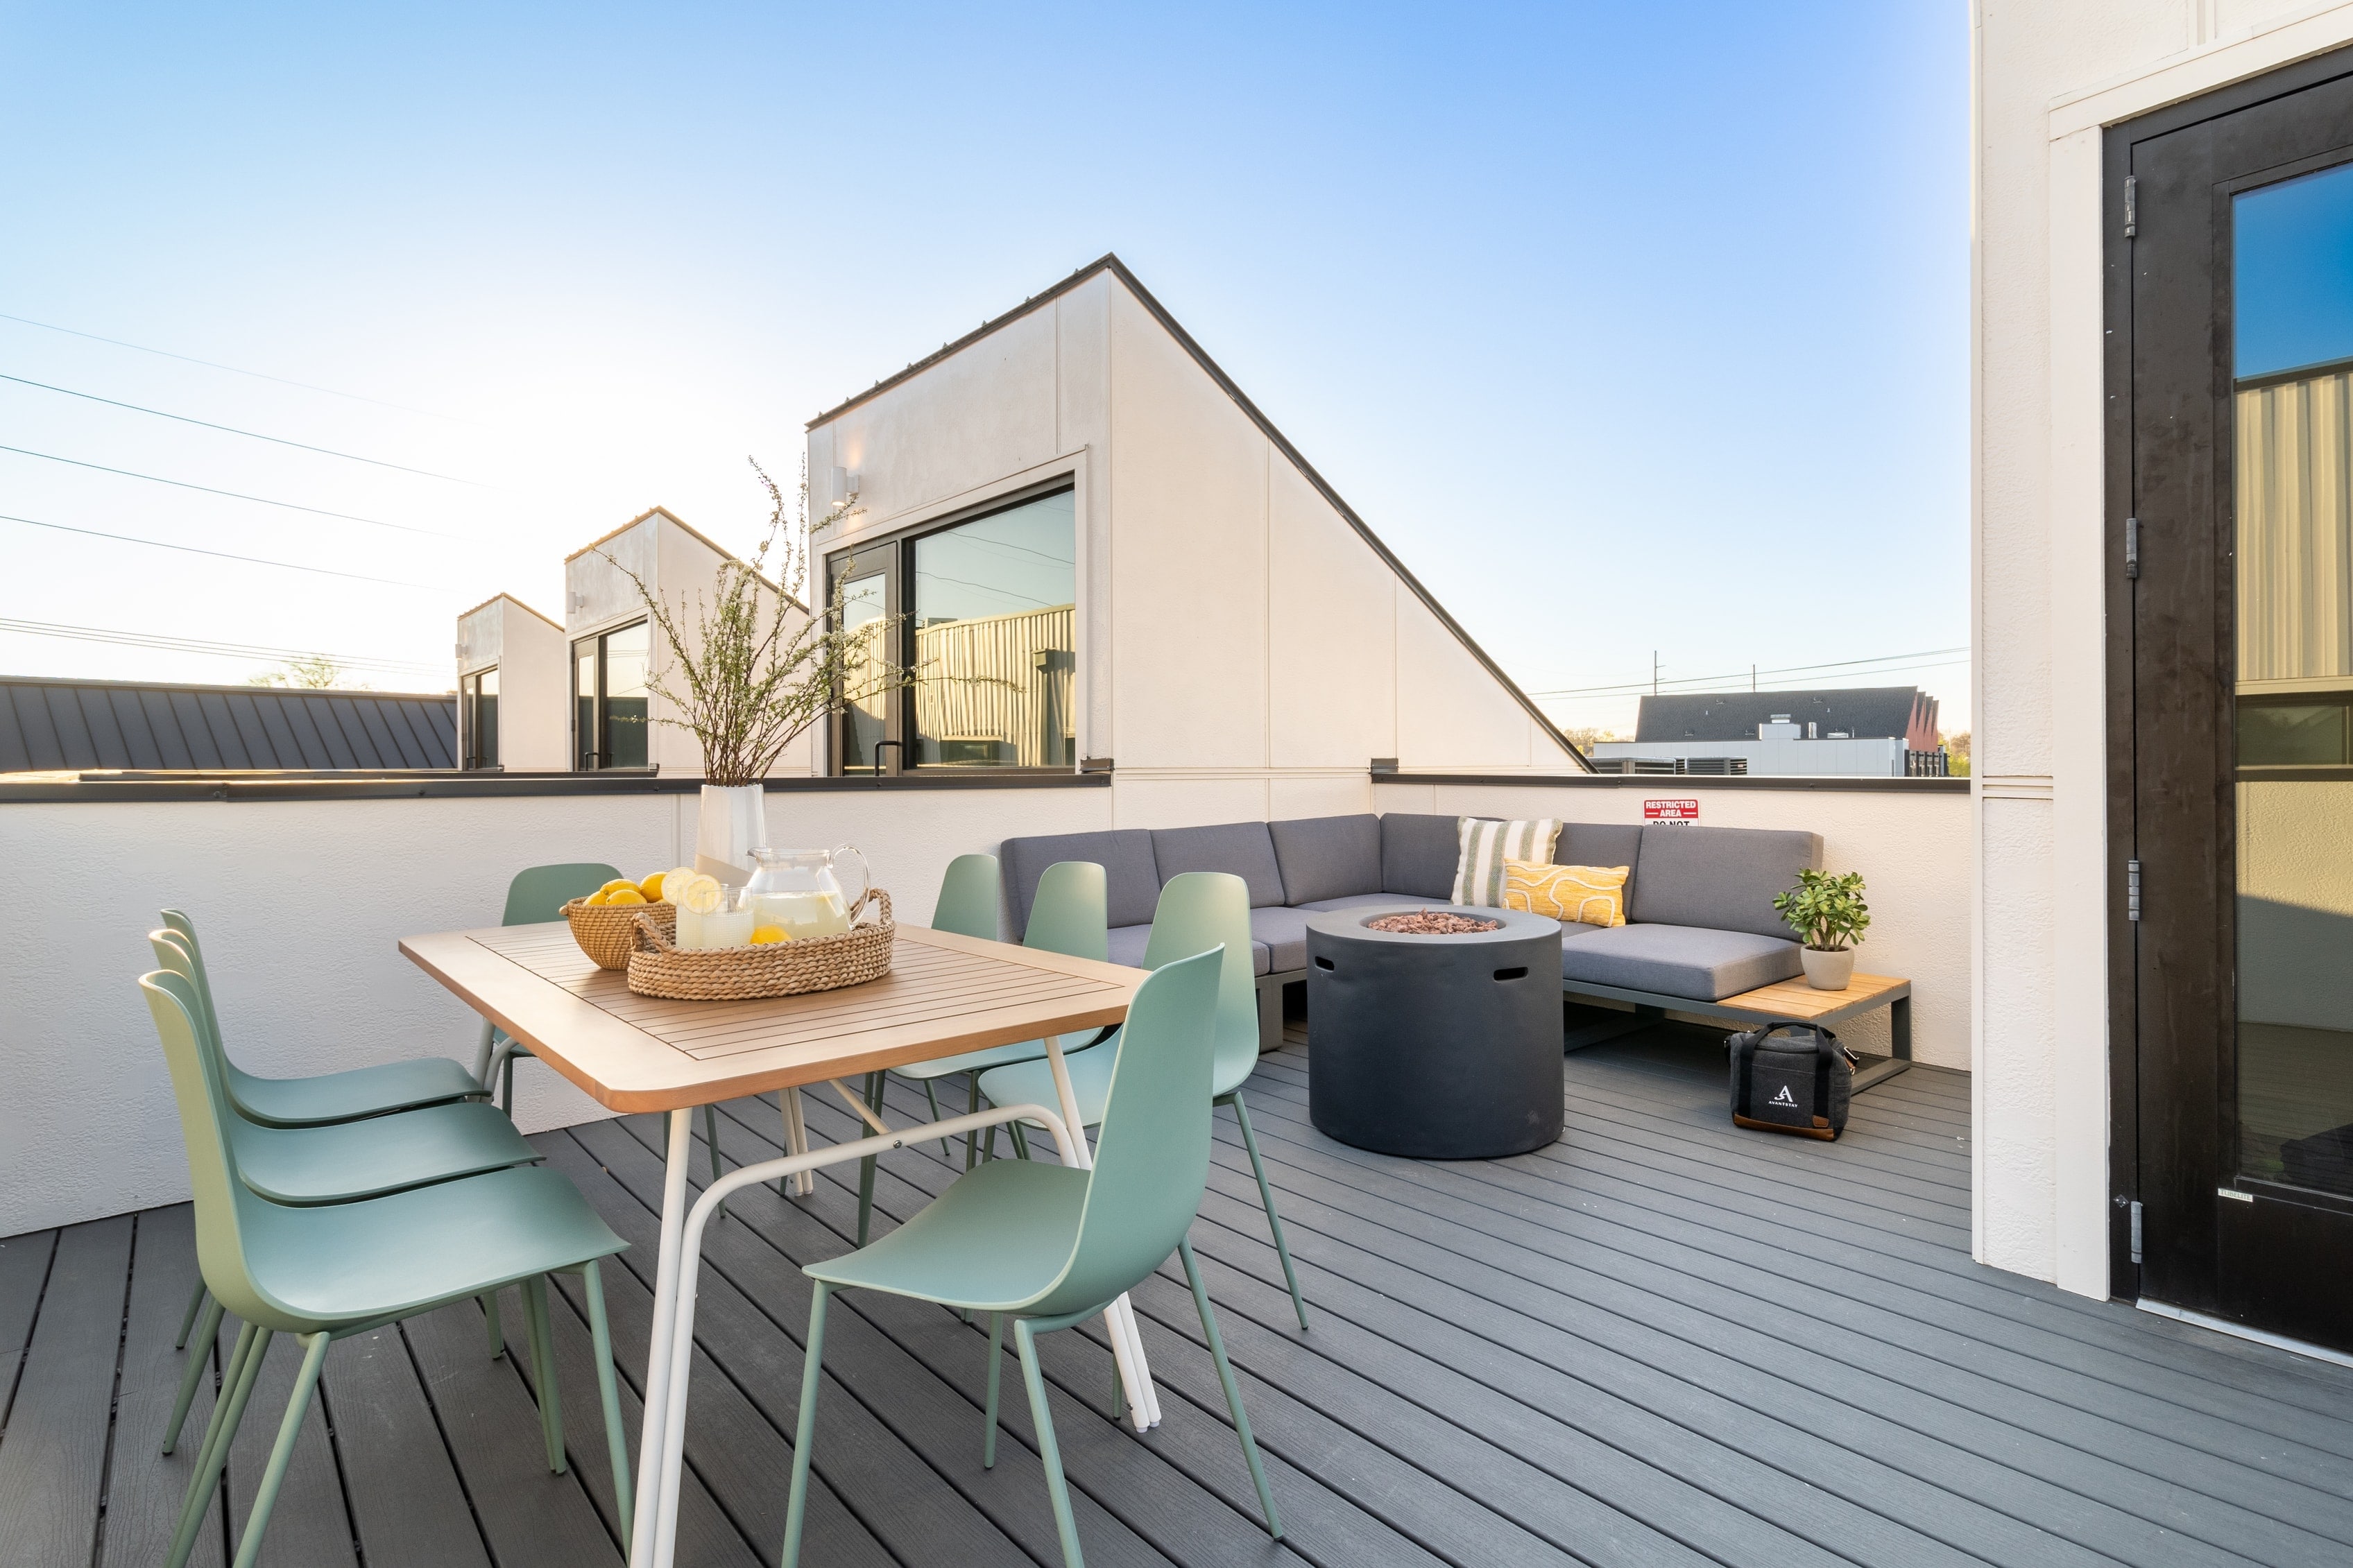 Private rooftop deck features a fire pit, comfortable seating area, and outdoor dining table.